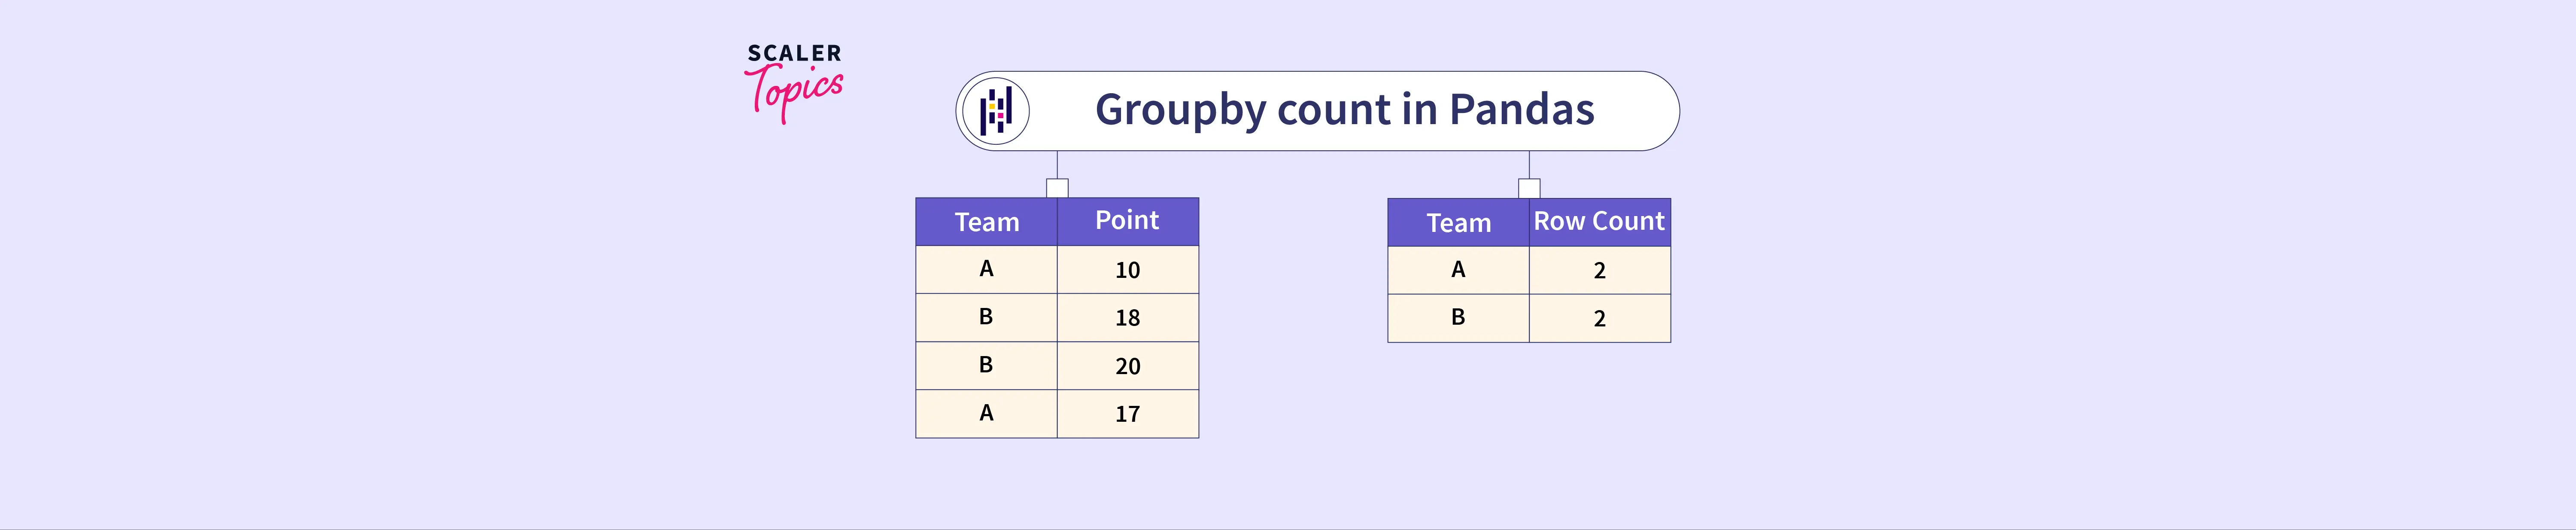 What is Groupby.count in Pandas? - Scaler Topics